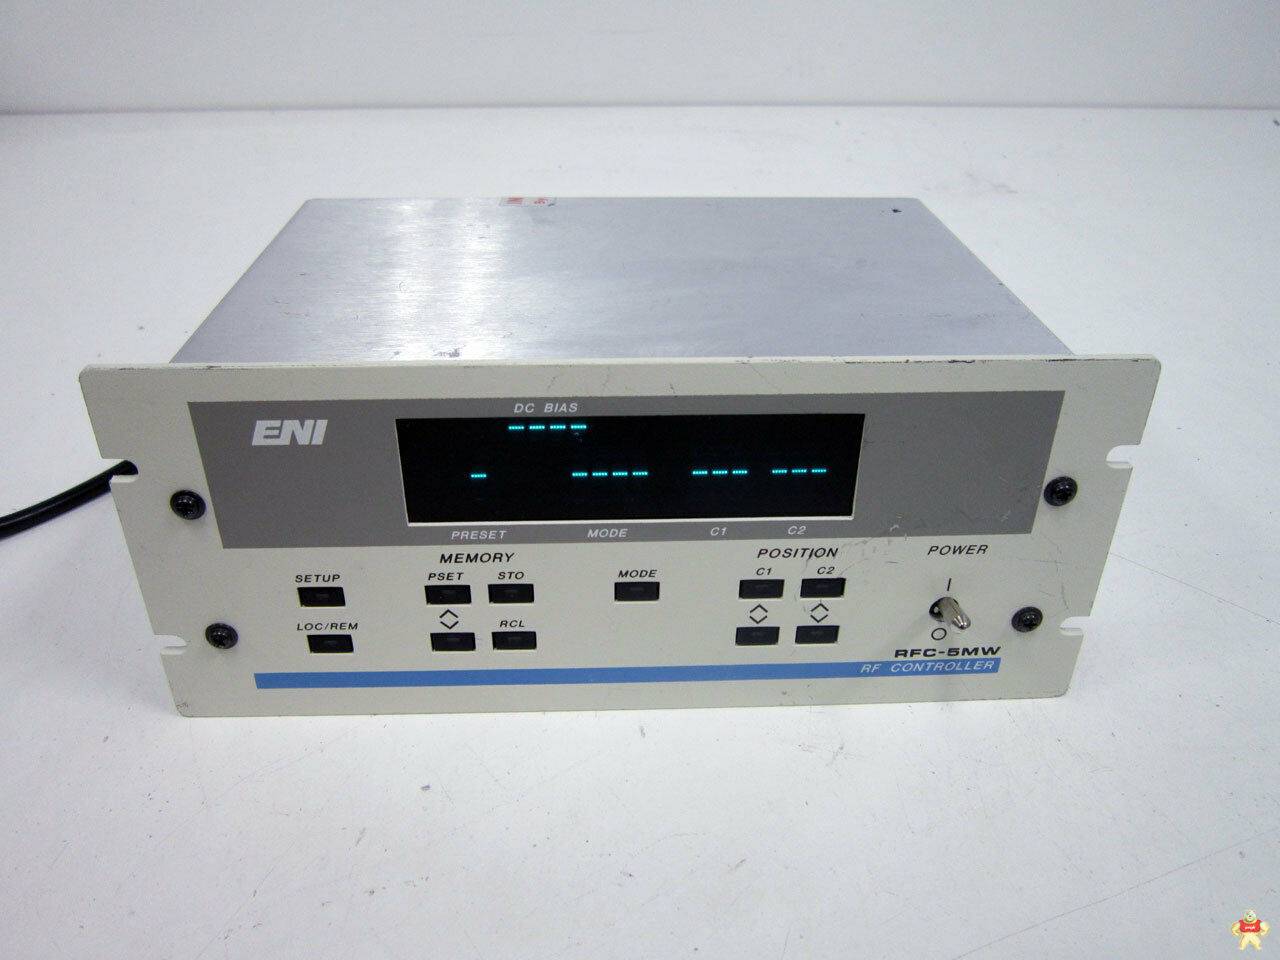 Extreme Networks 16535 X440-G2-48p-10GE4 Ethernet Switch 